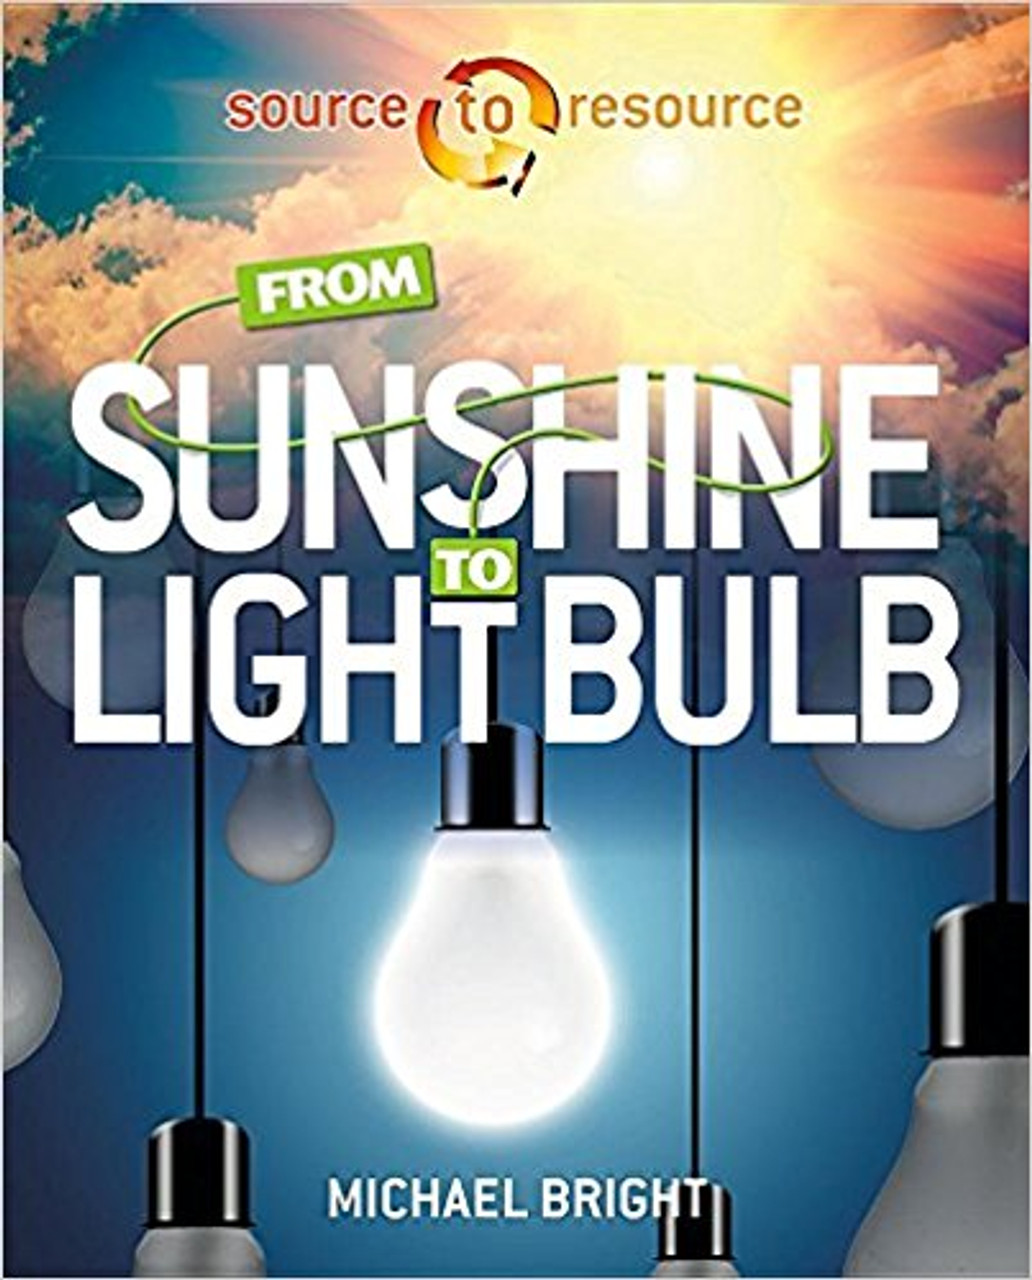 From Sunshine to Bulb by Michael Bright